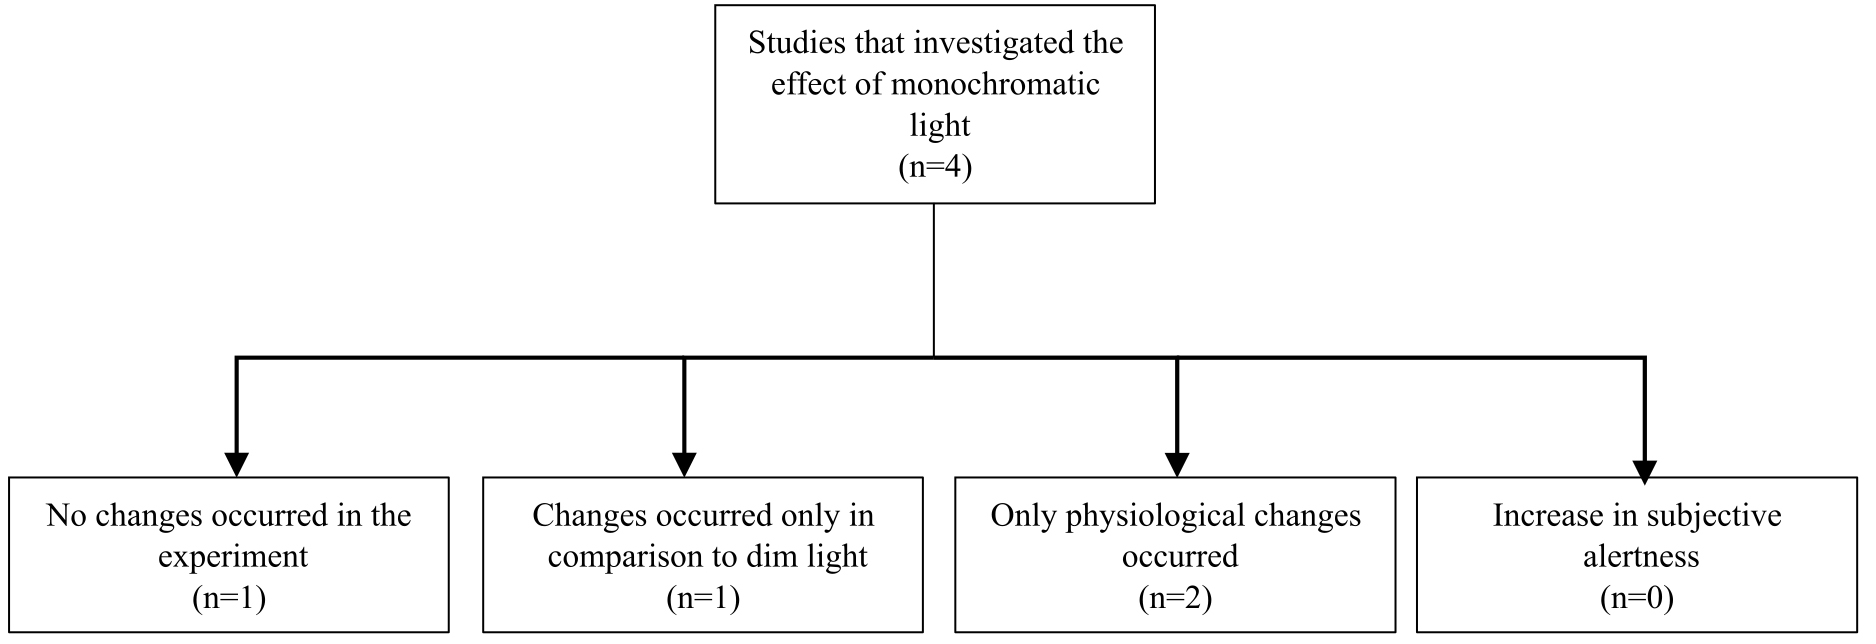 Studies that investigated the effect of monochromatic light on alertness and the main conclusions.